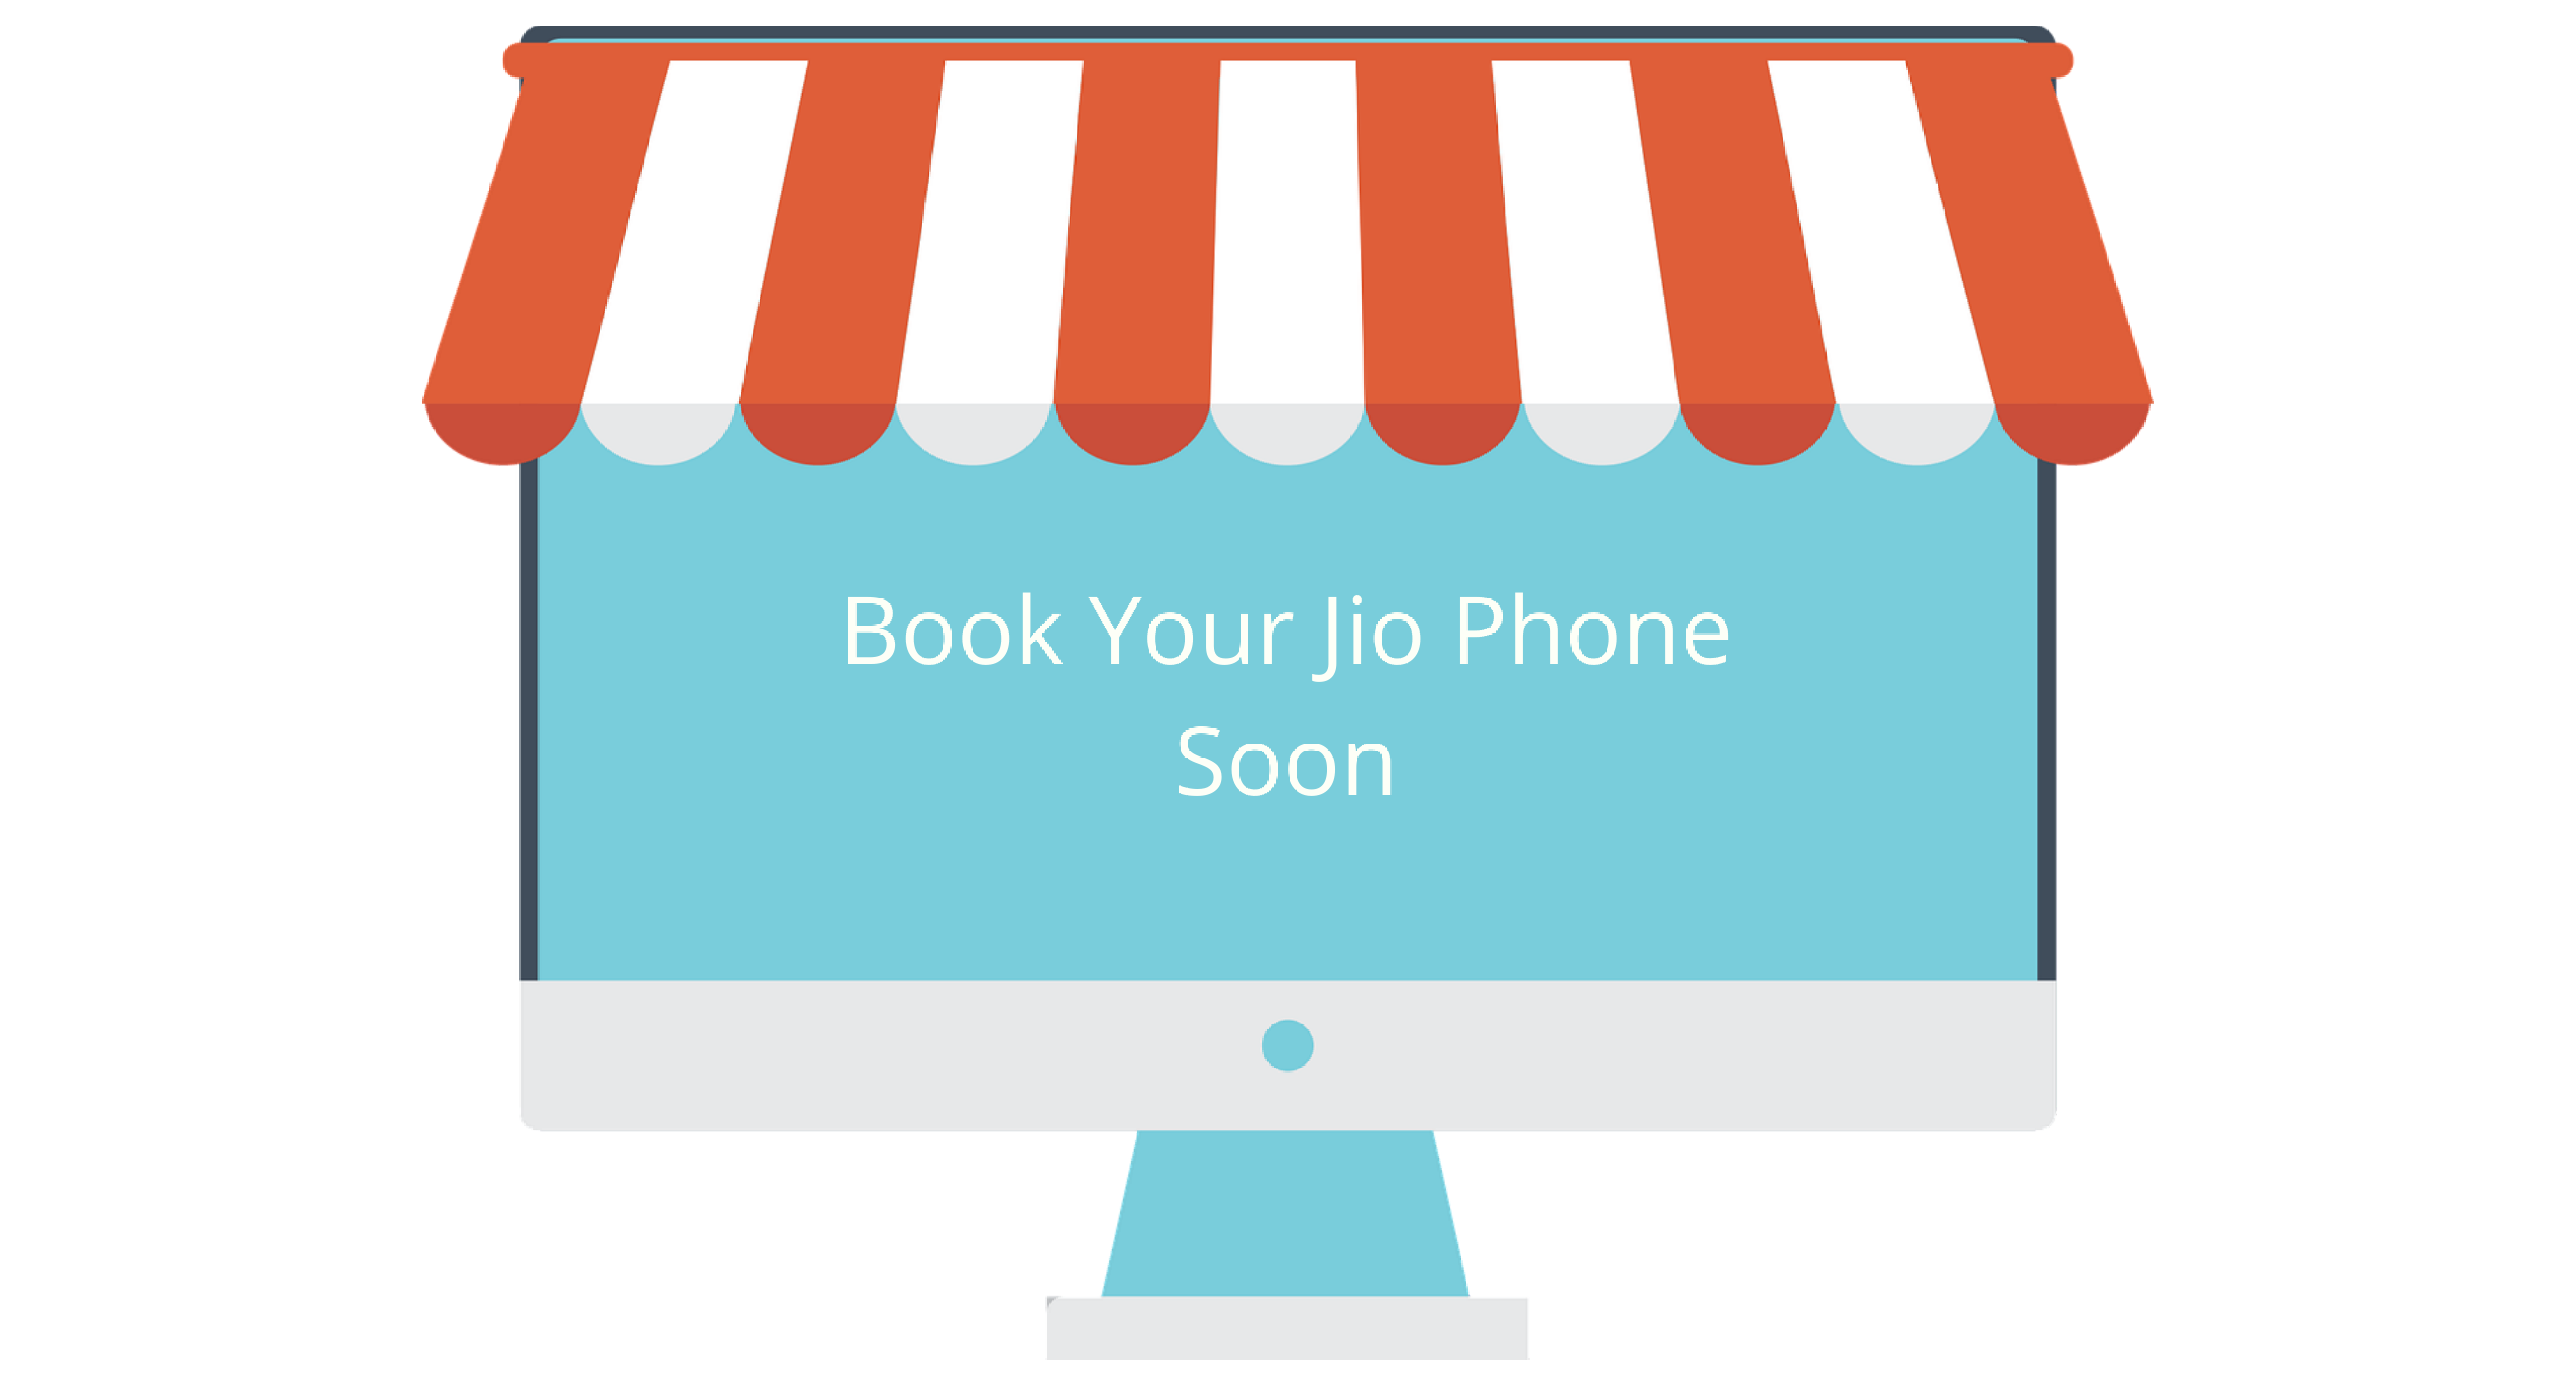 Book Your Reliance Jio Phone Starting 24th August, Know What to Do?